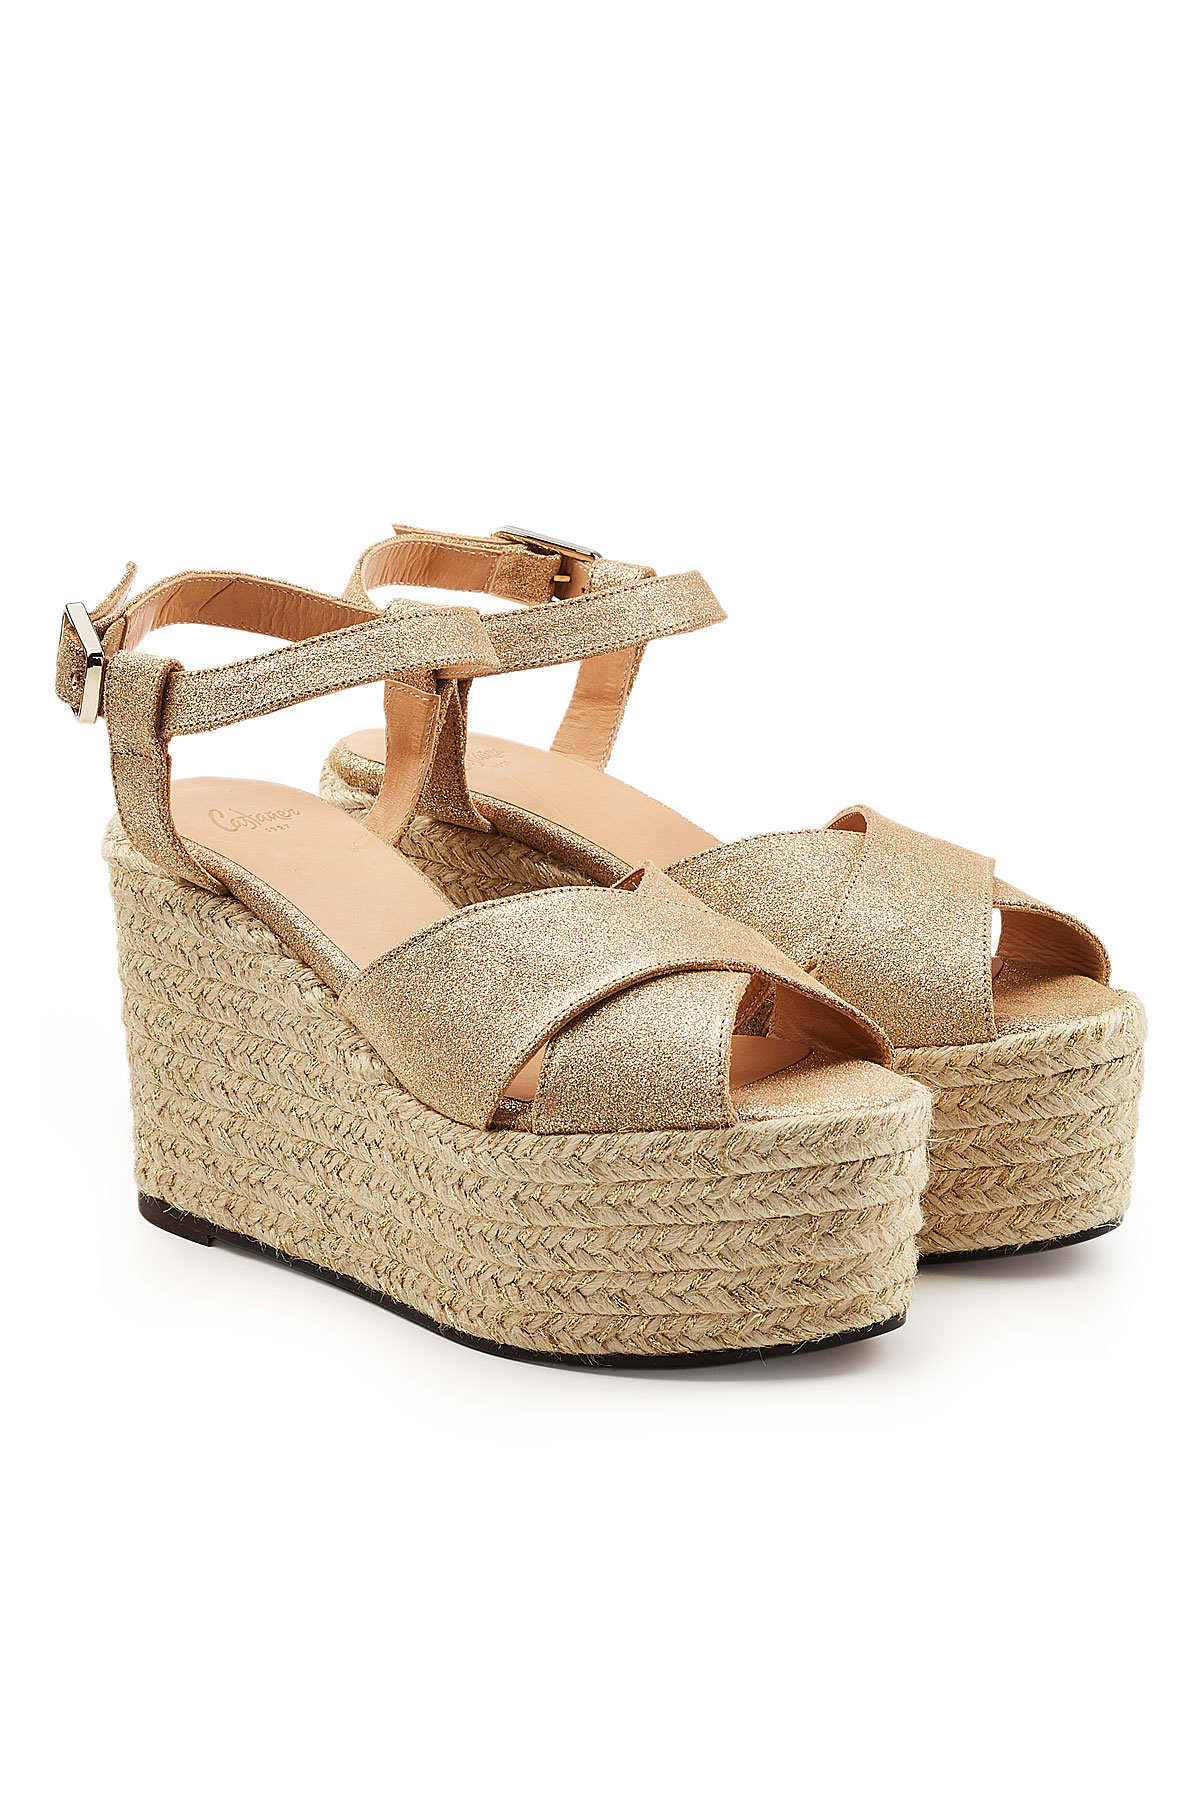 Castañer - Espino Wedge Sandals with Metallic Leather